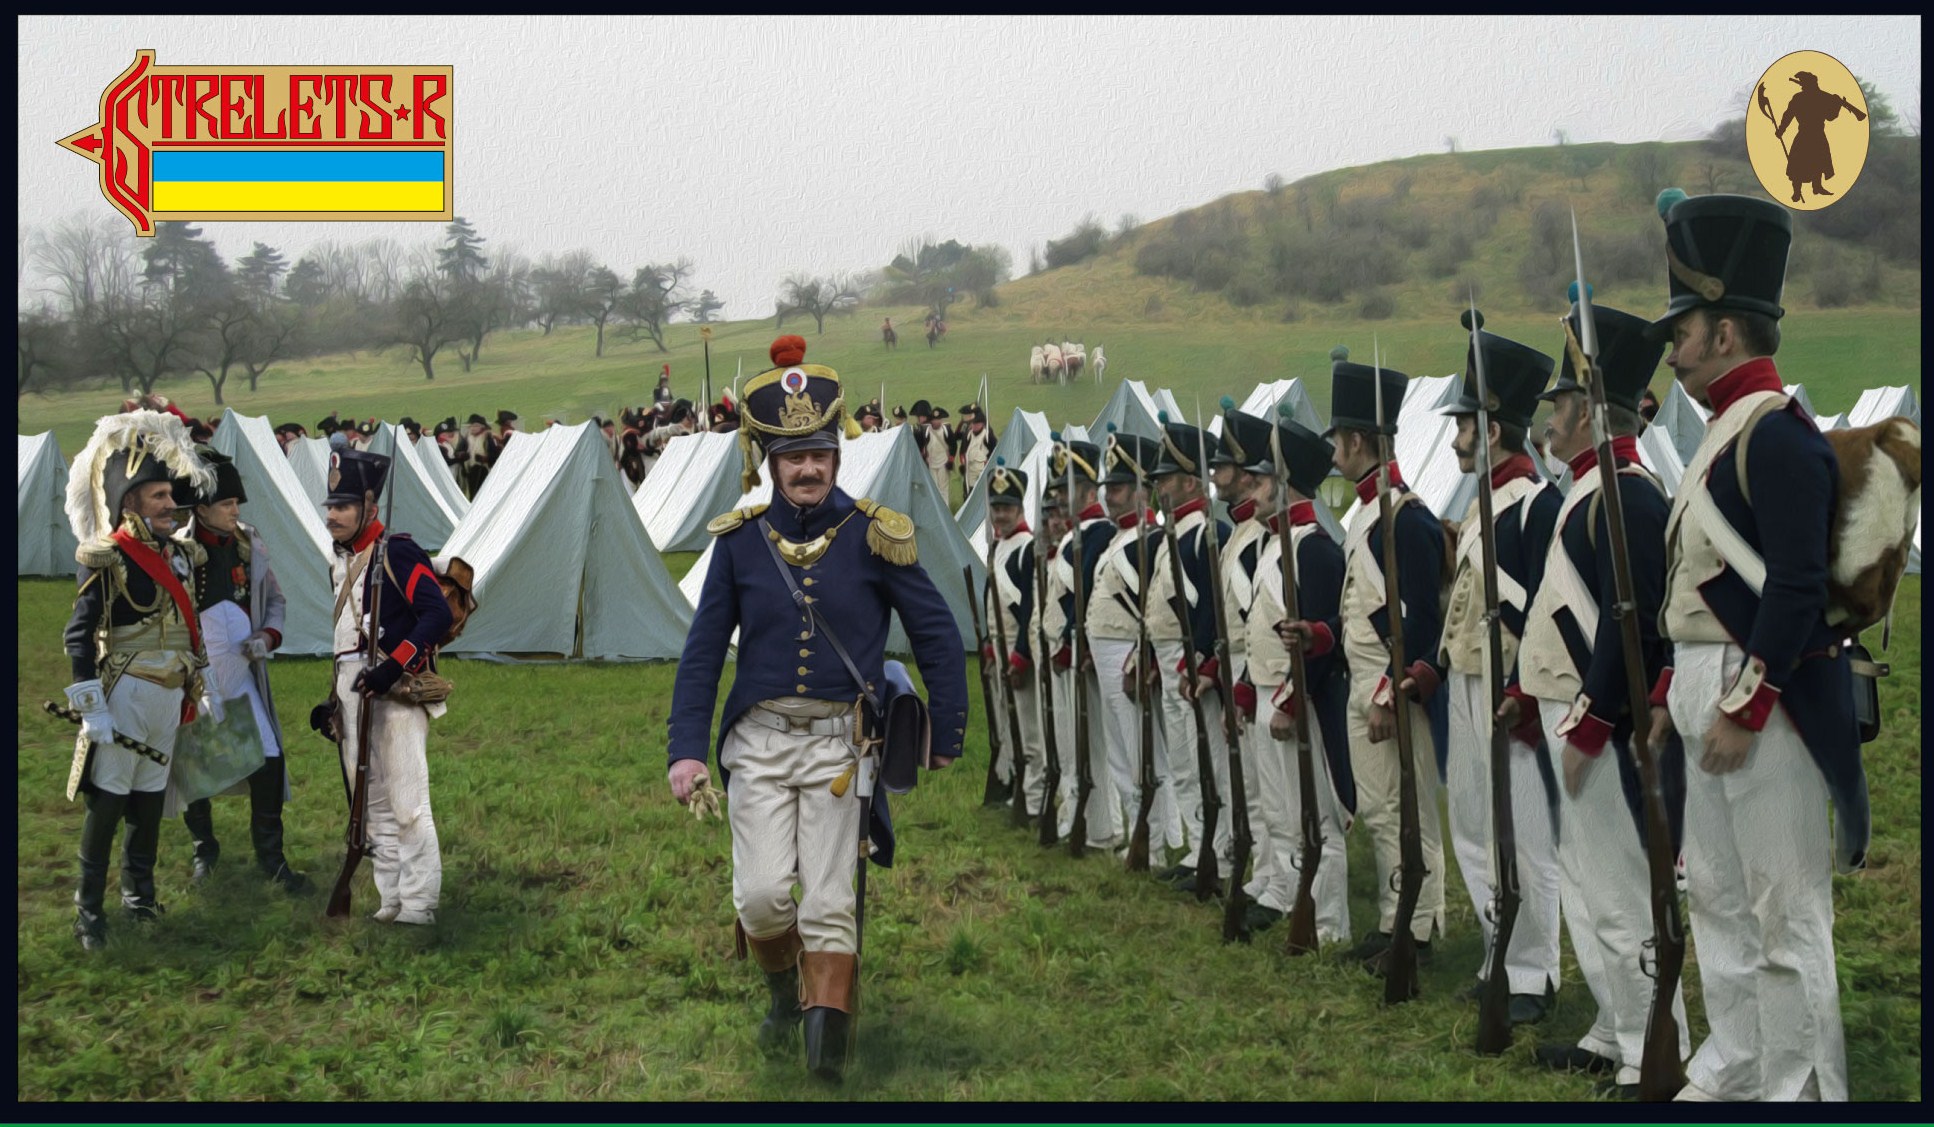 Napoleonic French Infantry standing Order Arms